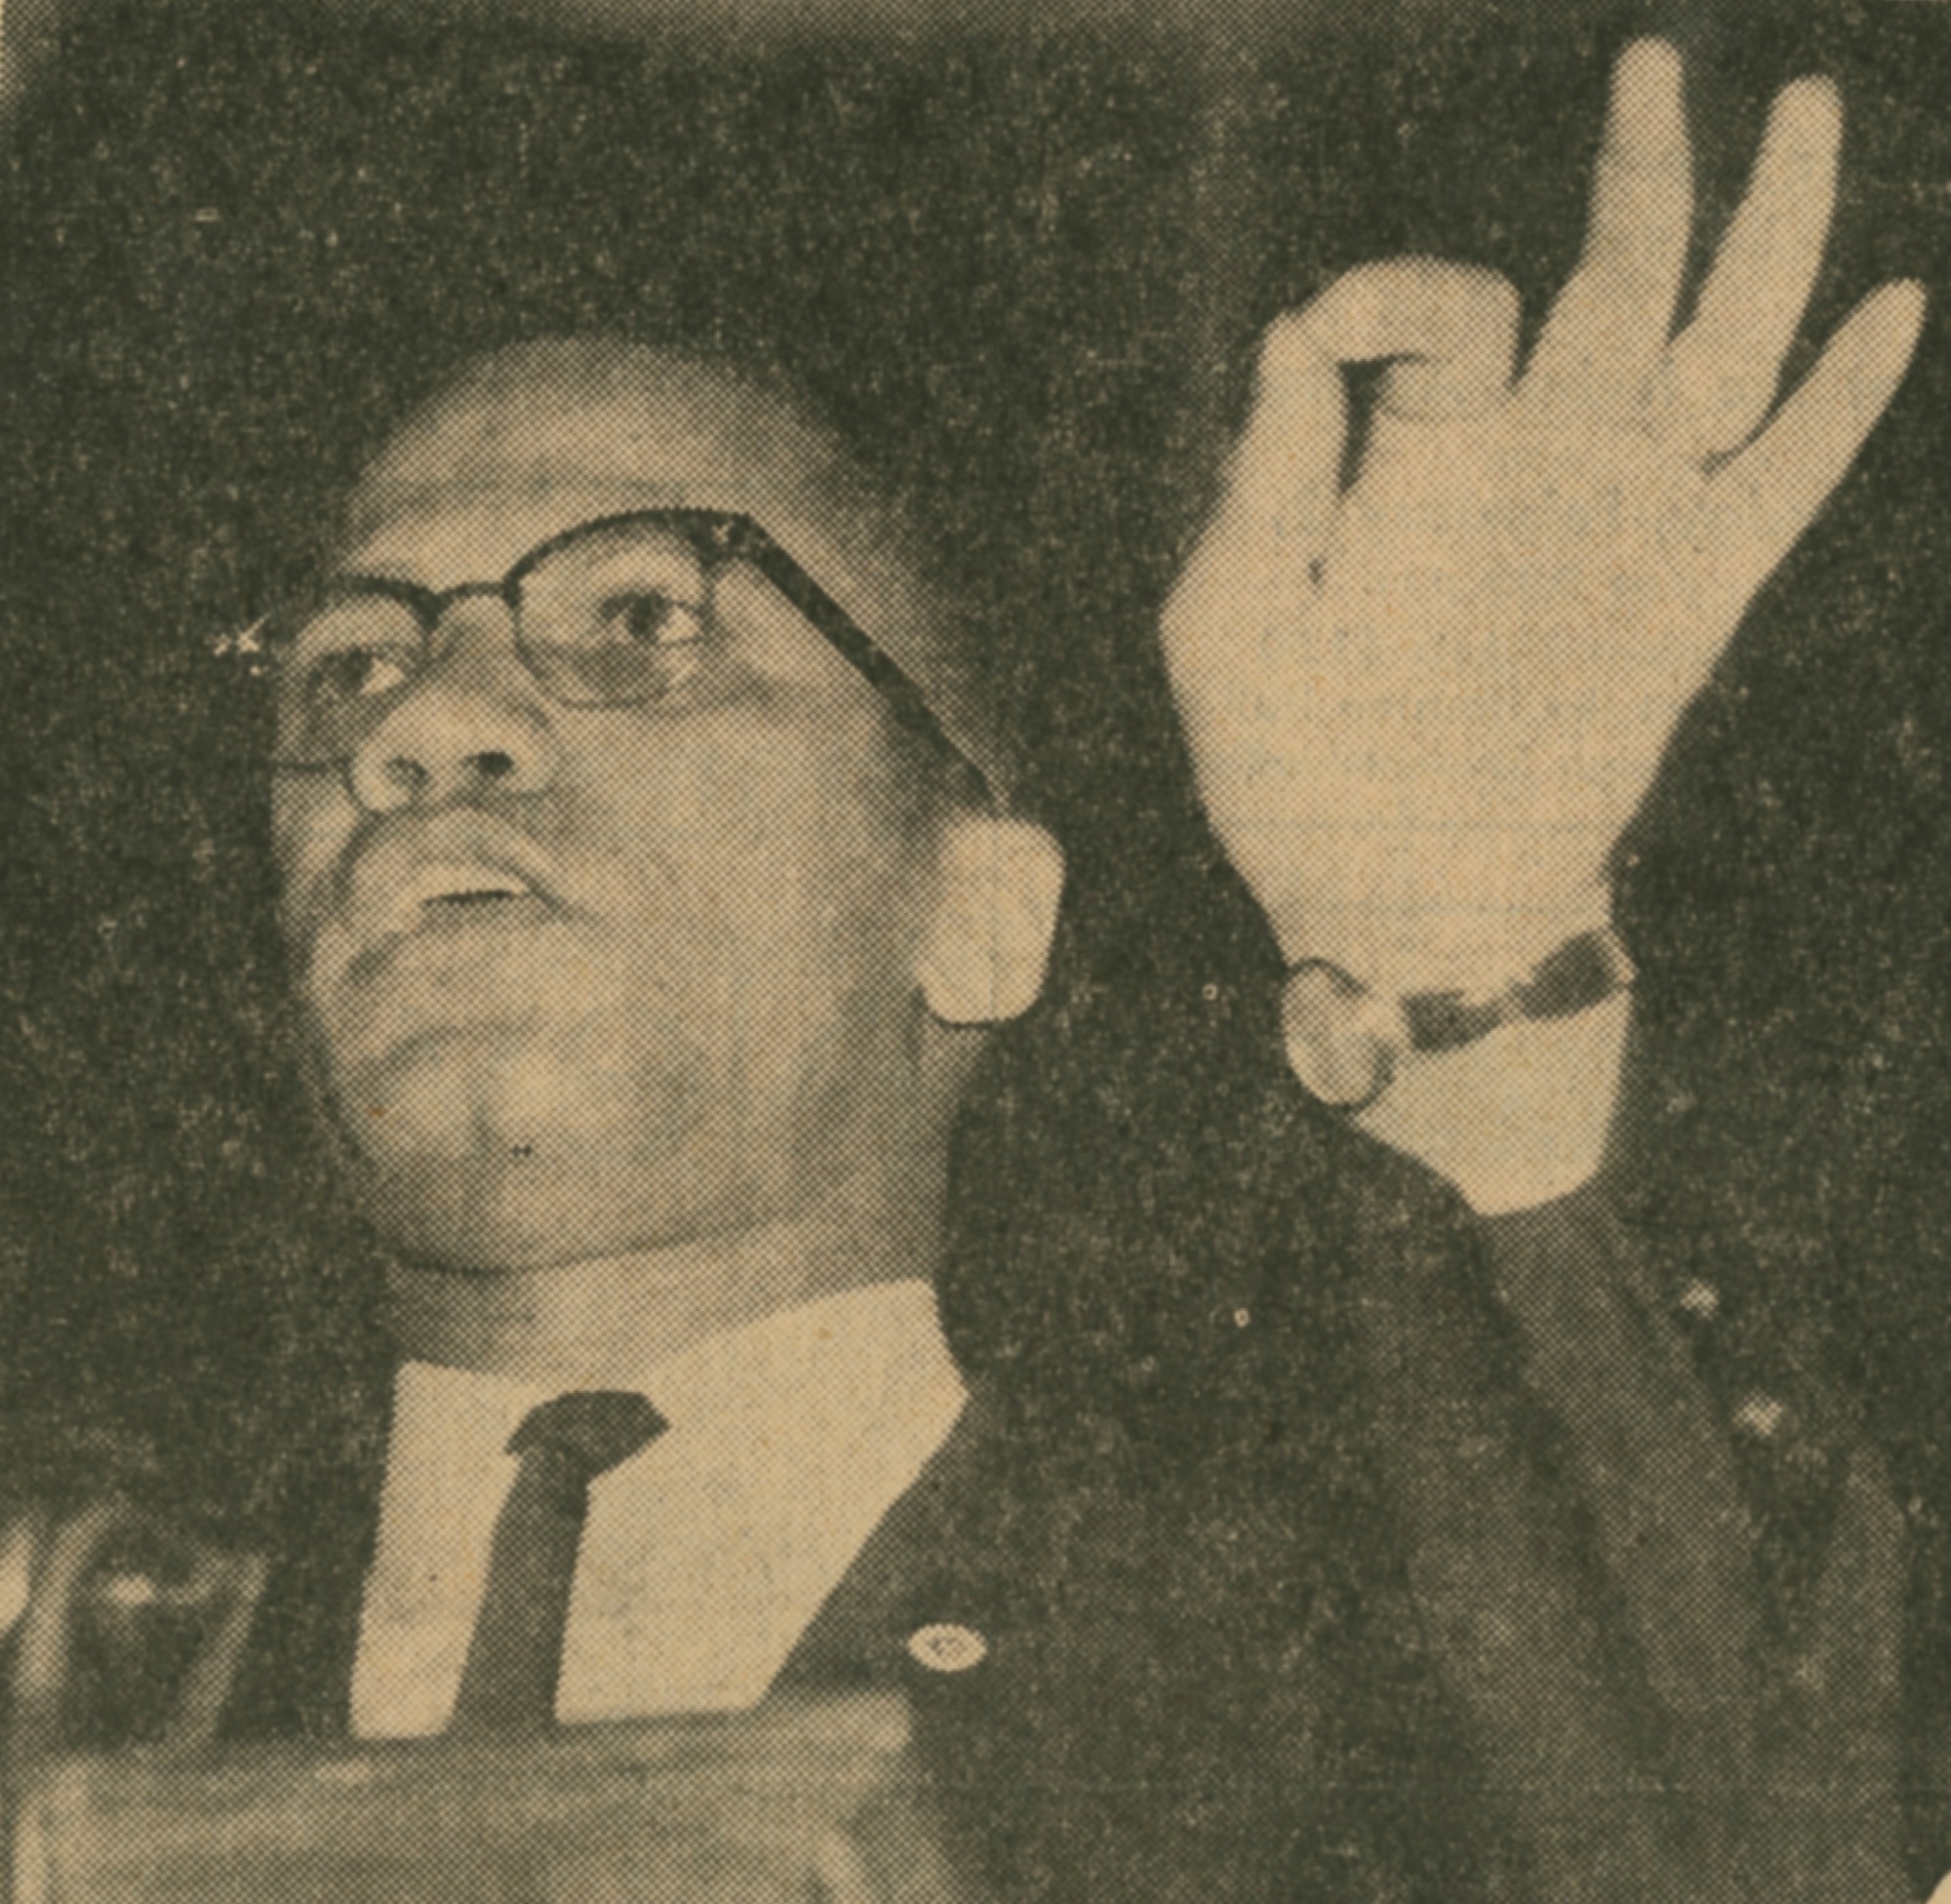 Dressed in a suite and tie, Malcolm X speaks in Irvine Auditorium in January of 1963.